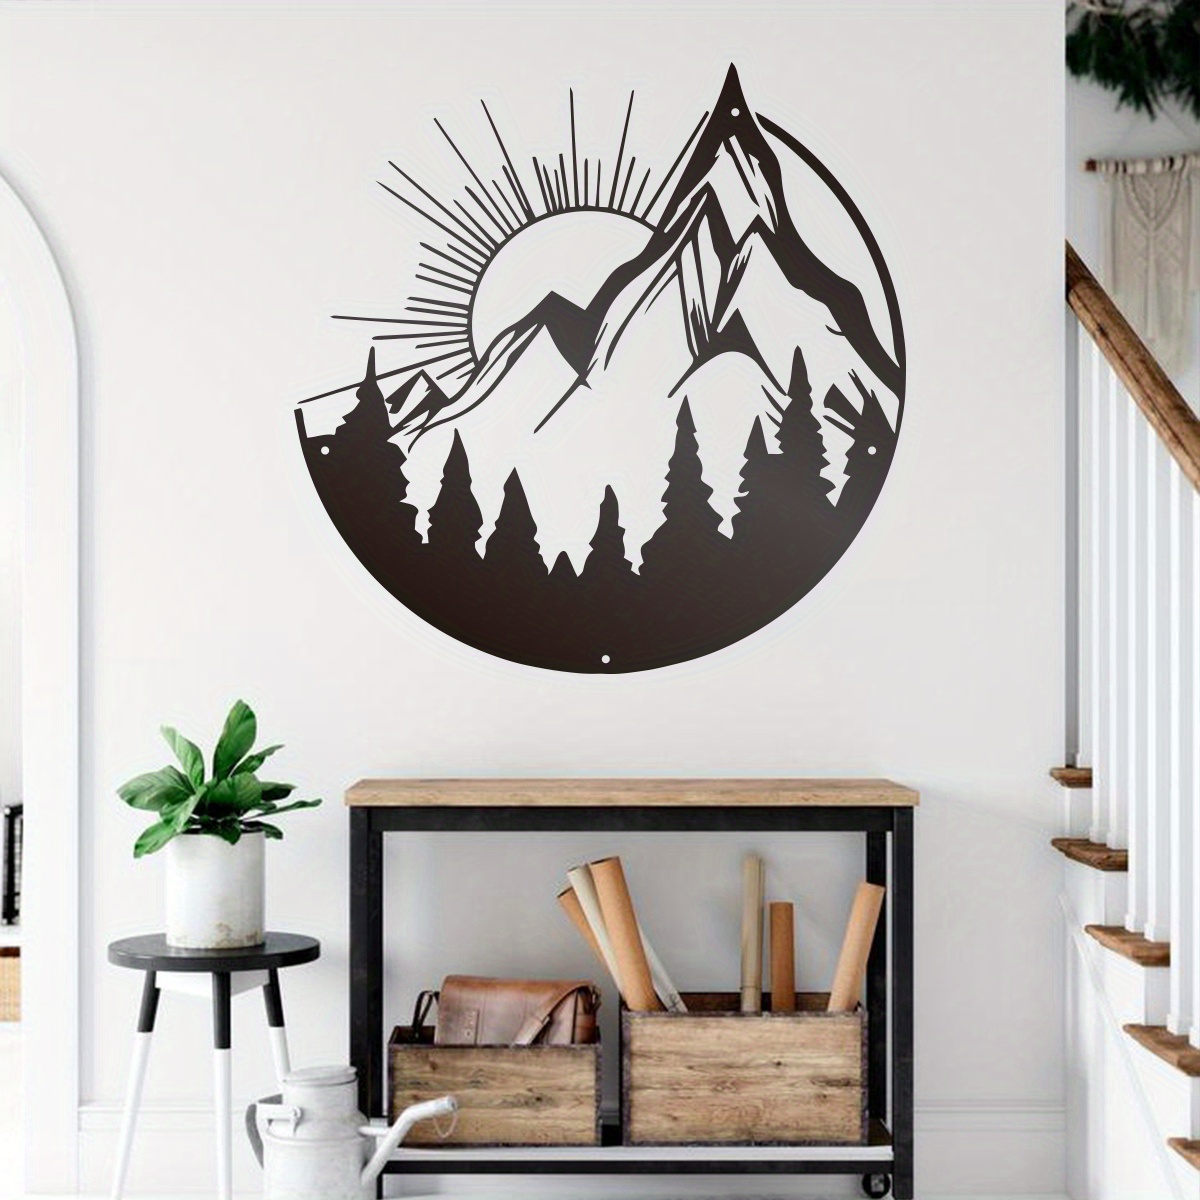 

1pc Metal Mountain & Sunset Wall Art, Circular Nature-inspired Modern Outdoor Wall Decoration, Artistic Metal Home Decor, Elegant Room Accent, Rustic Wall Hanging Piece